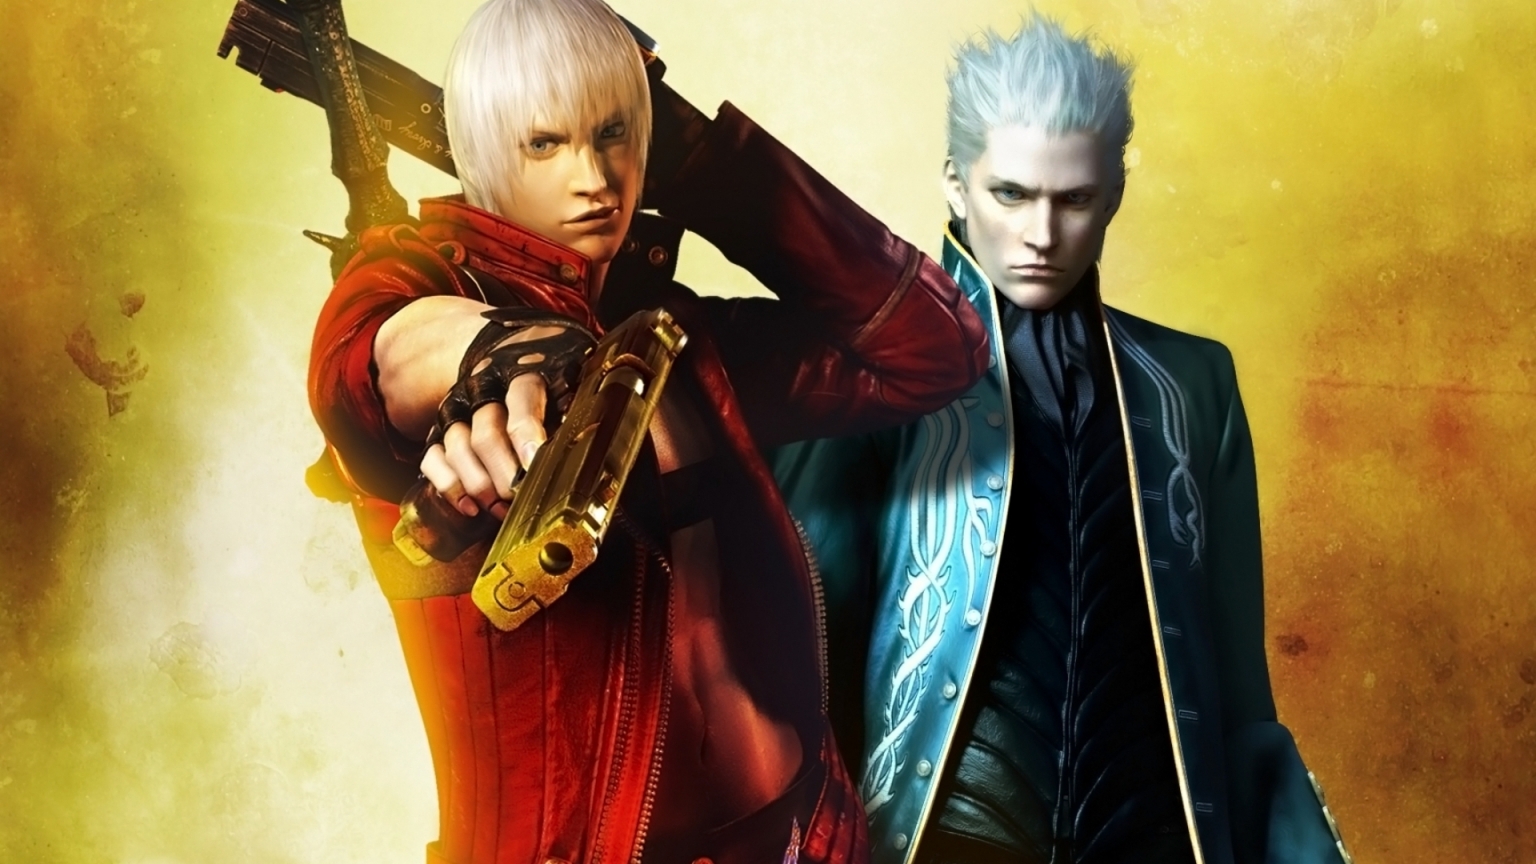 Devil may cry 3 for 1536 x 864 HDTV resolution